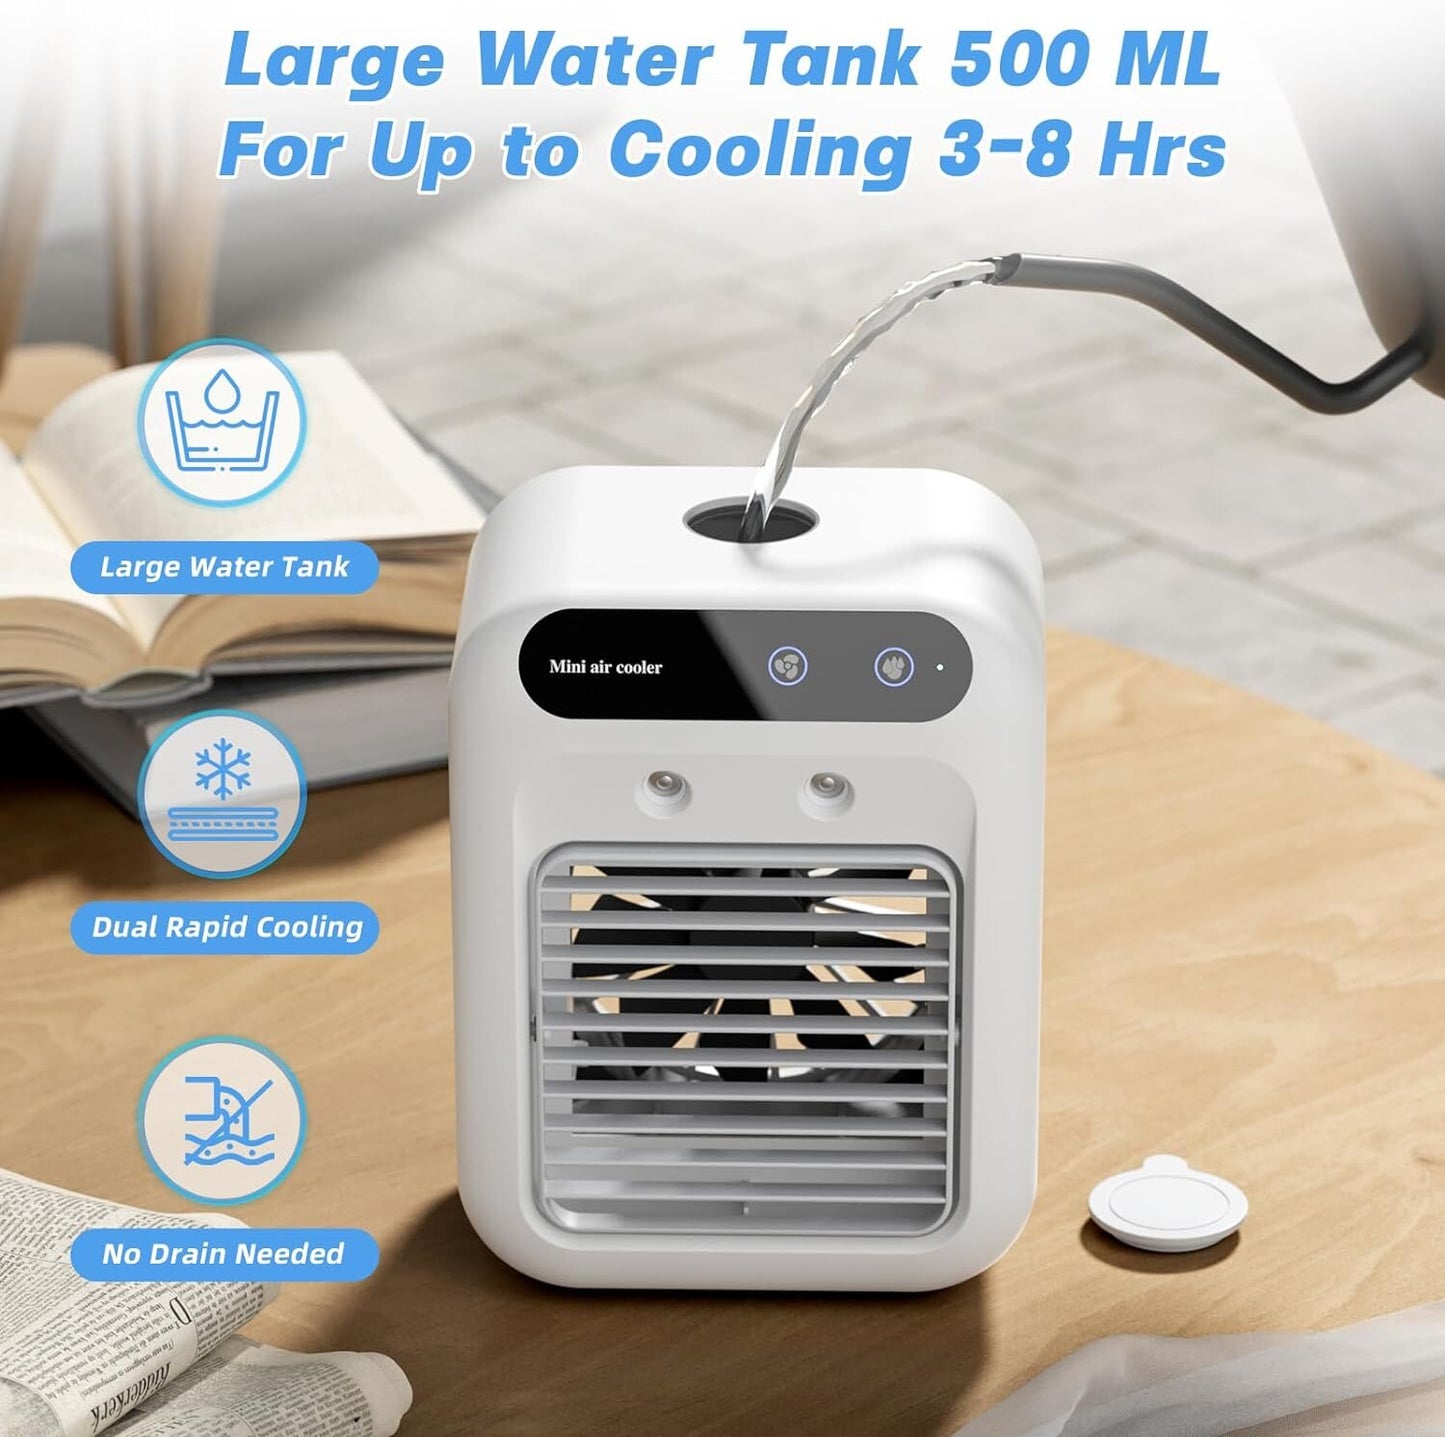 (Super large water tank) : 500ml large water tank, no need to add water repeatedly, 10H long-lasting spray, cooler and longer lasting. The large opening on the top is more convenient to add water, releases fine water mist, and adds ice to make it cooler.